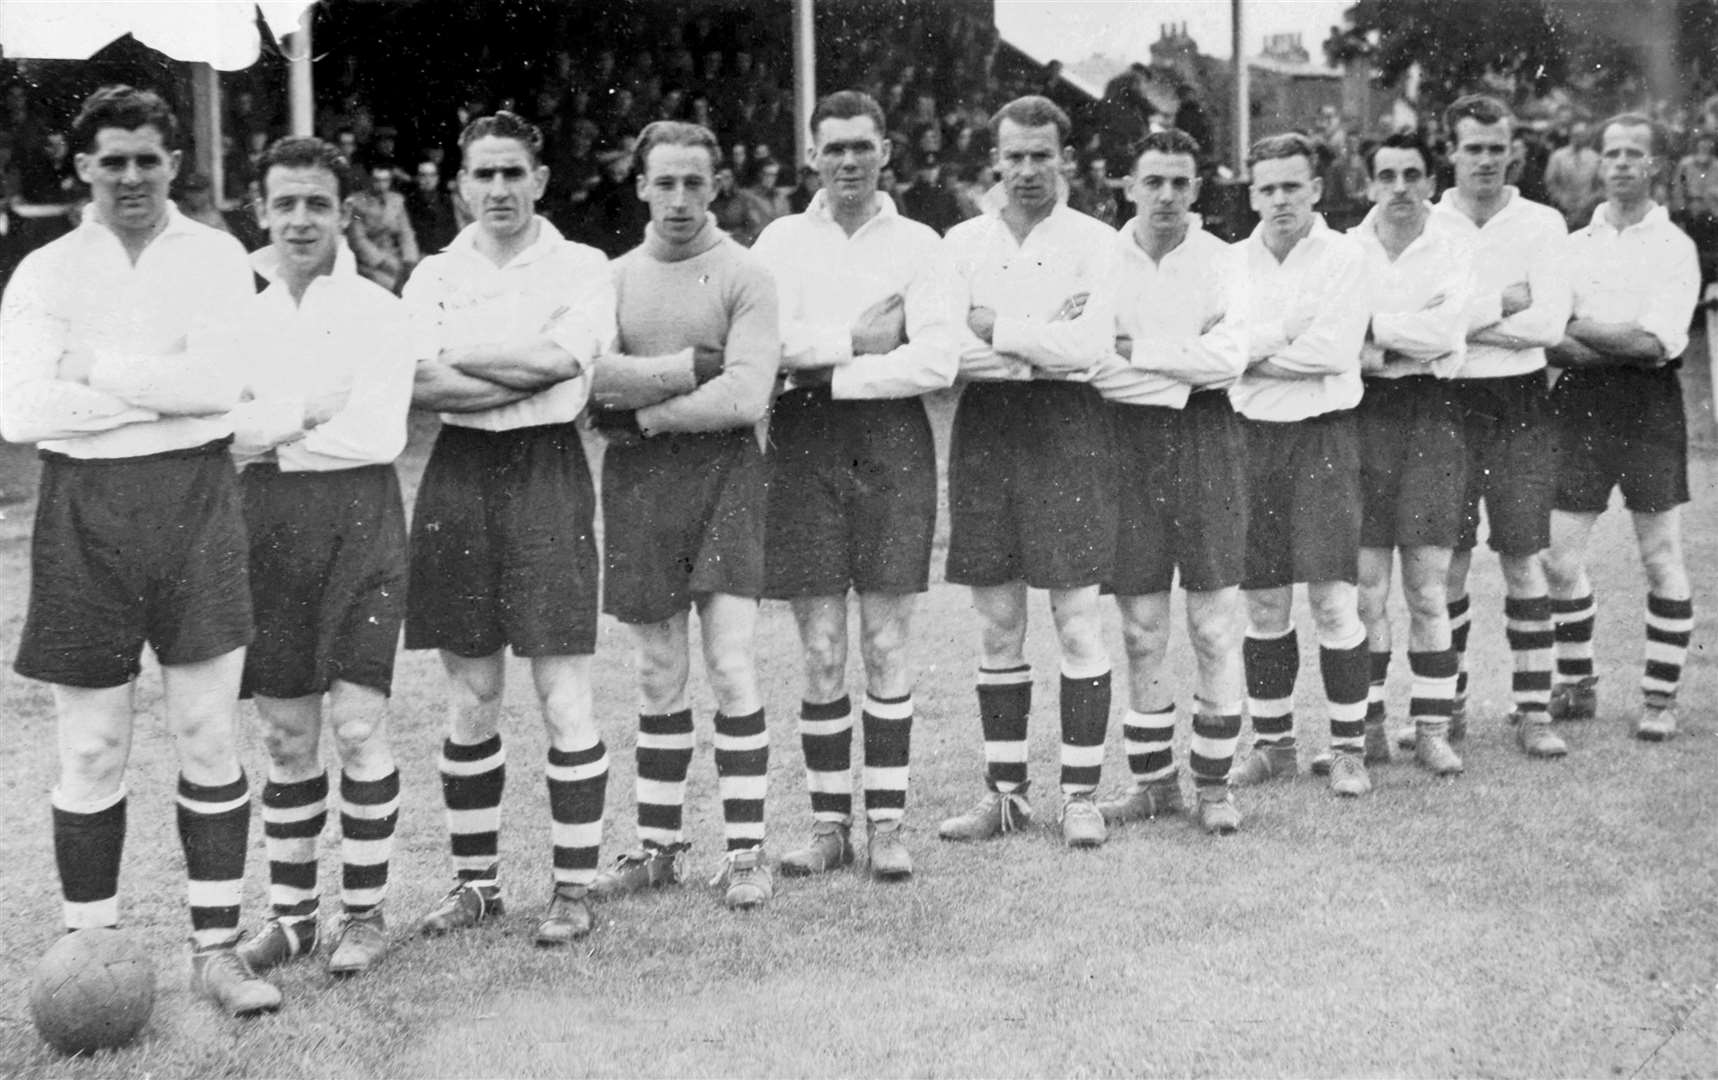 The Clach Clean Sweep side of 1947-48.